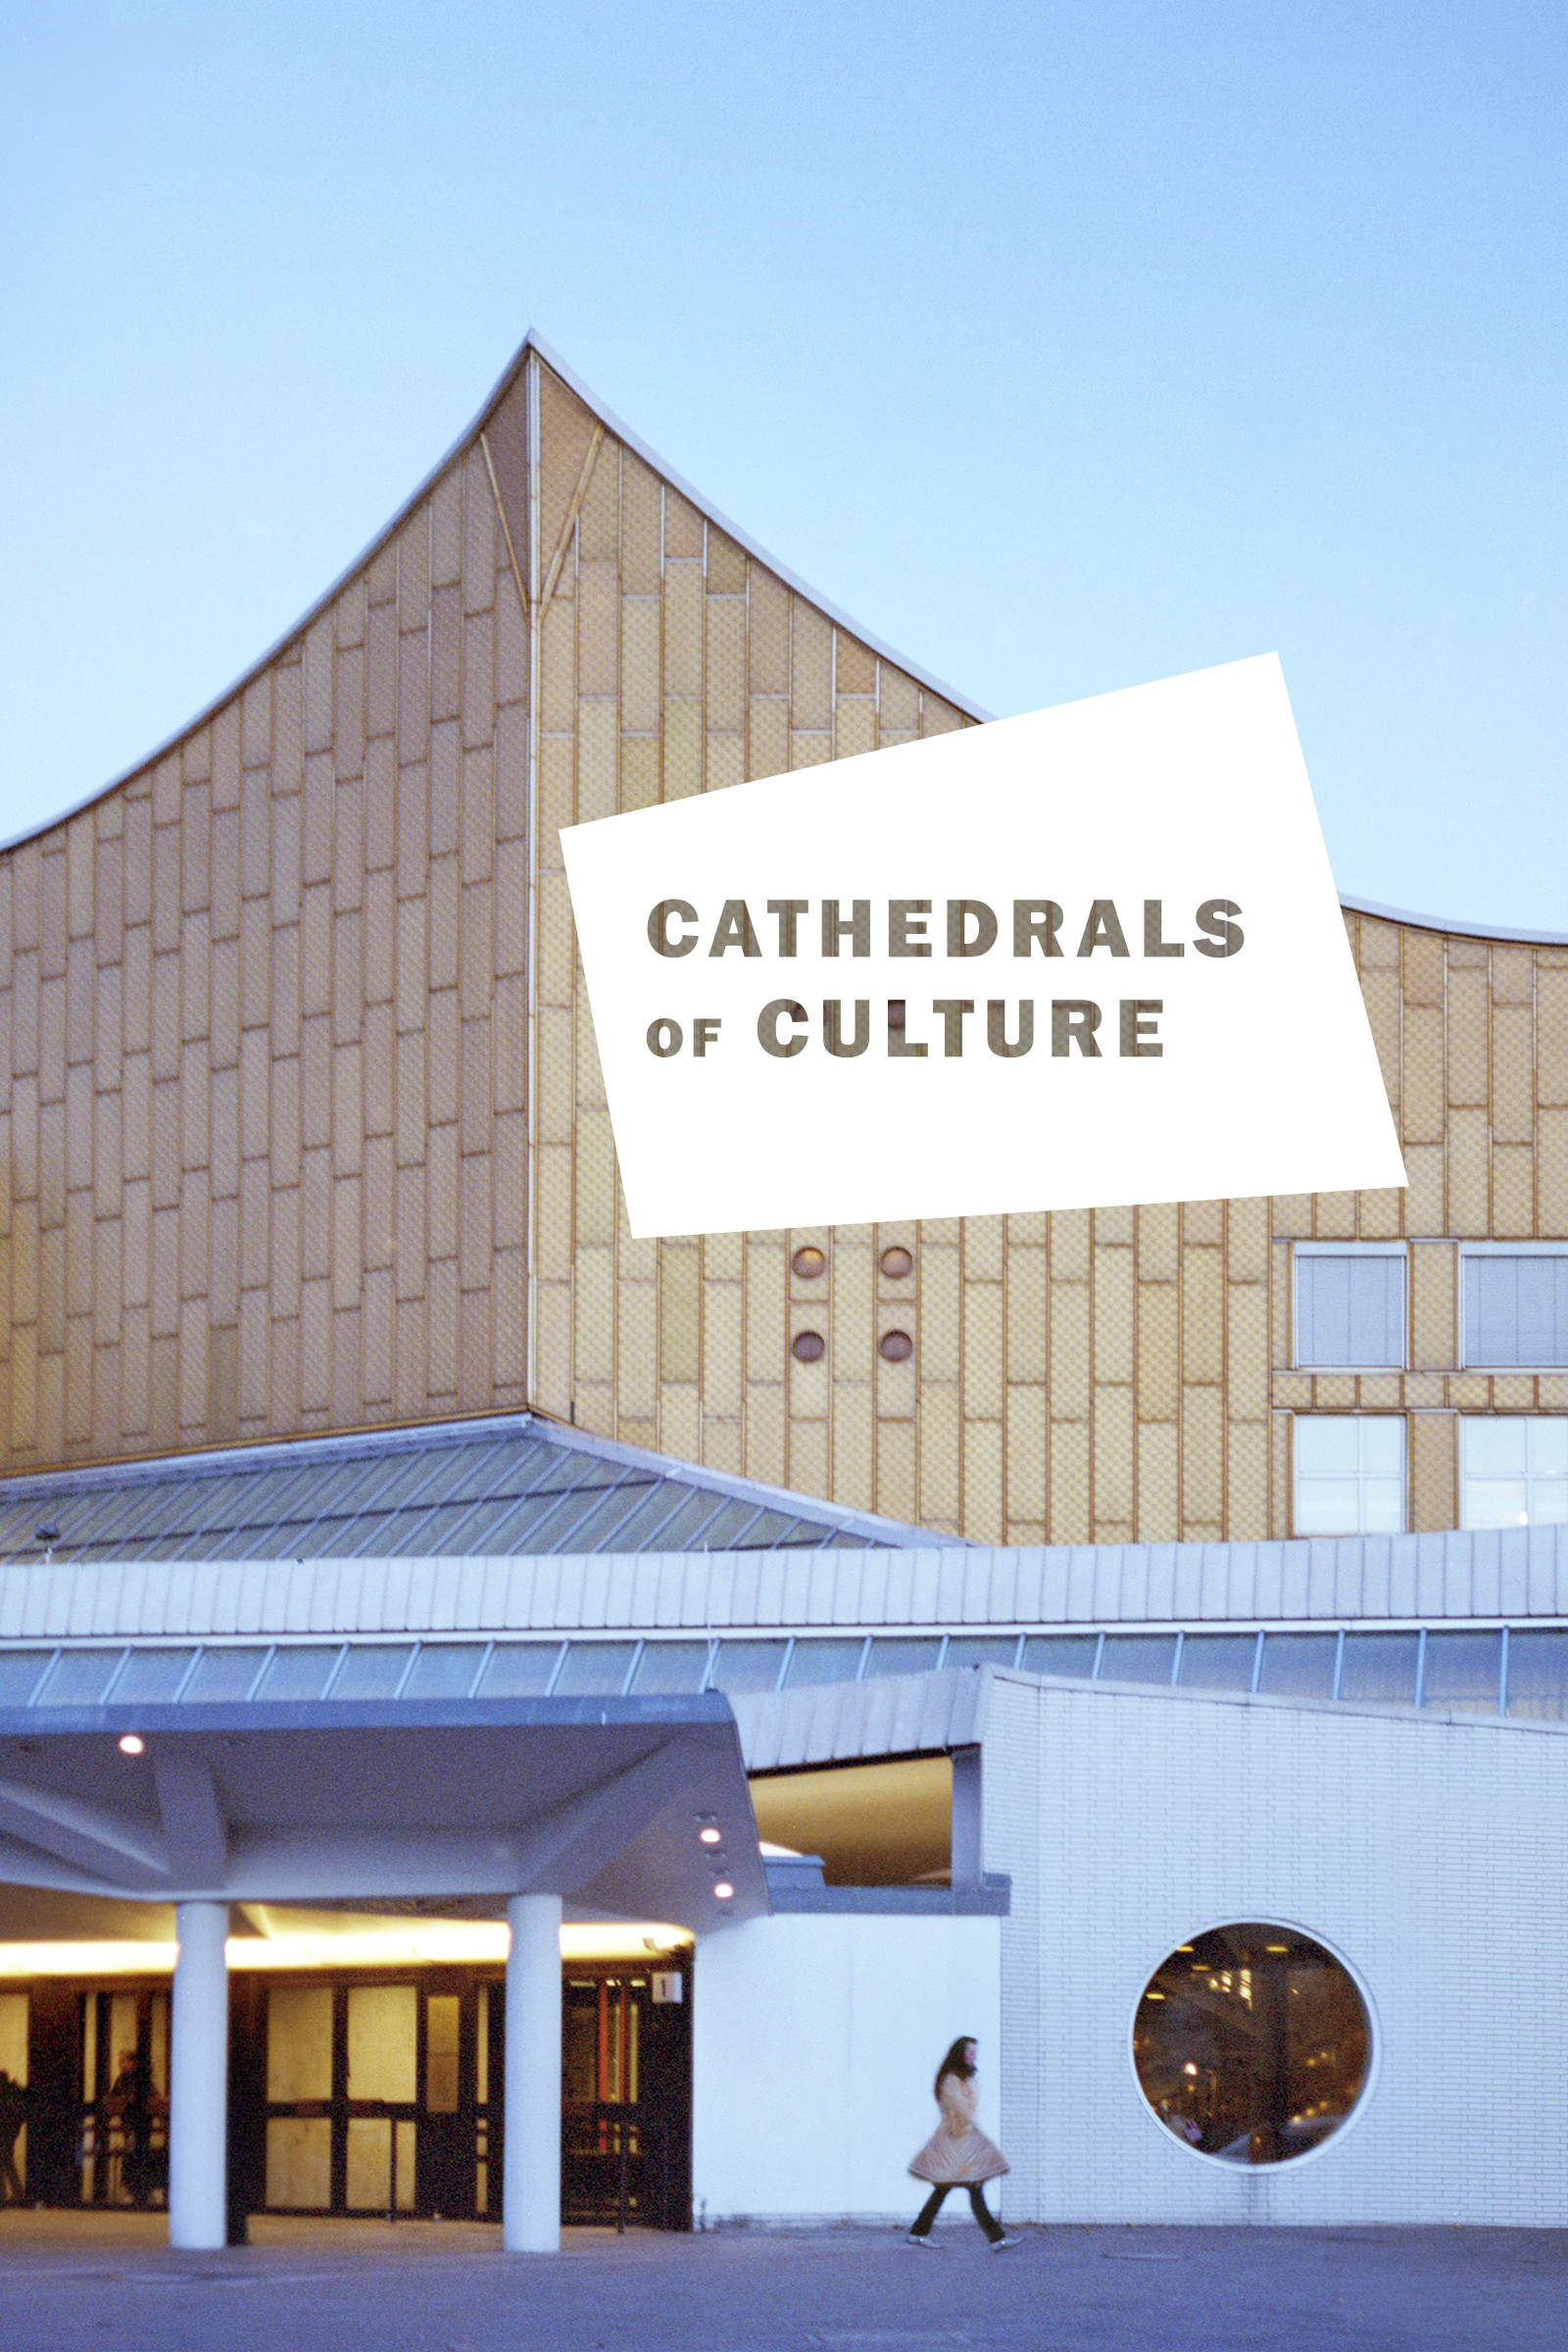 Where to stream Cathedrals of Culture